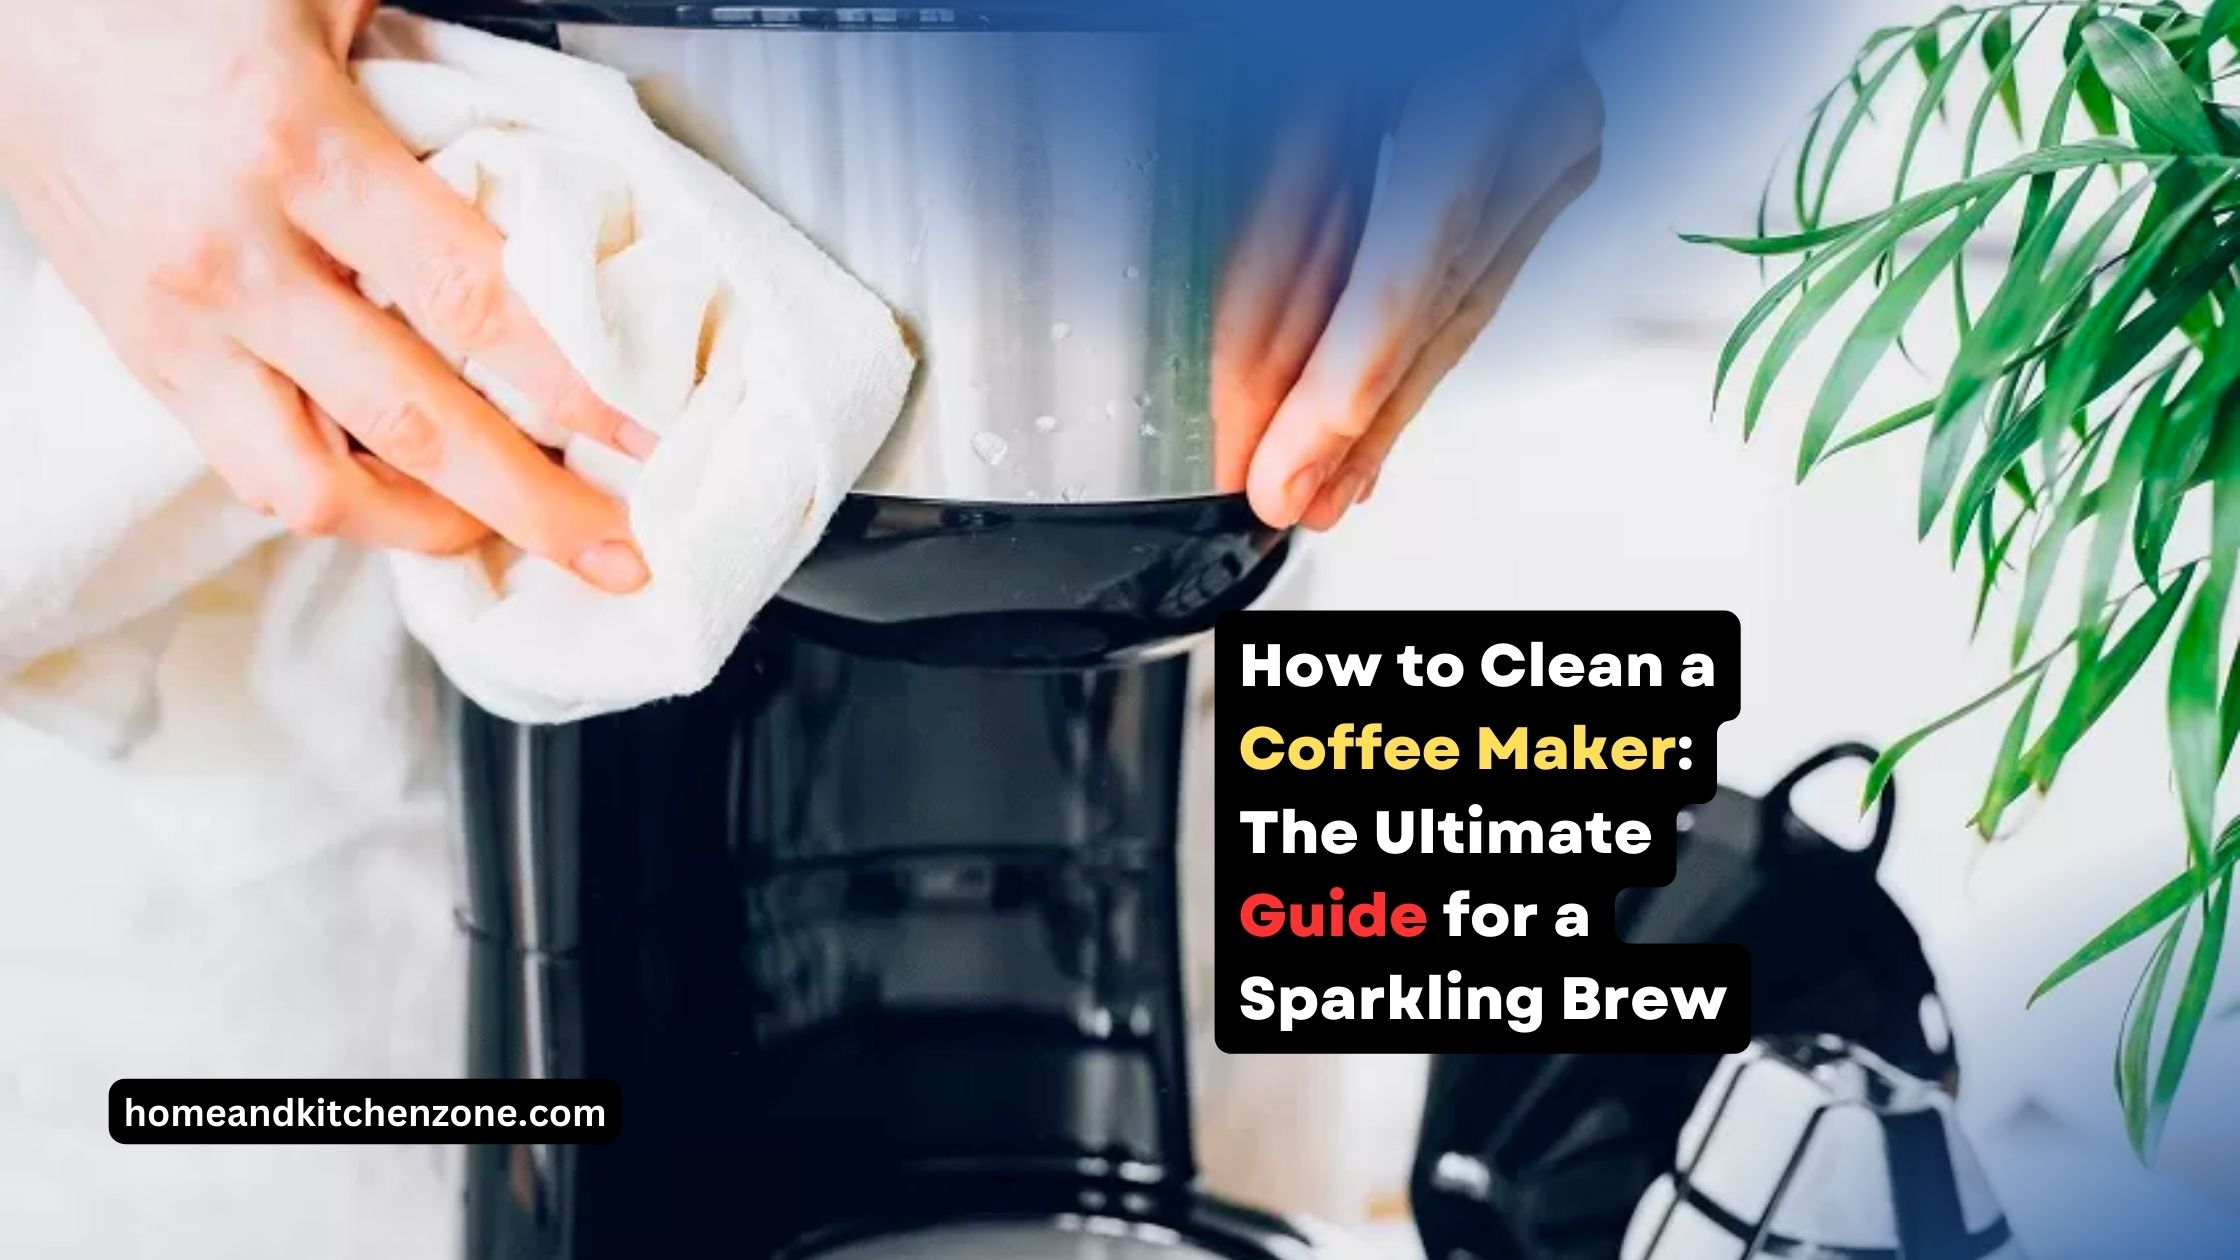 How to Clean a Coffee Maker The Ultimate Guide for a Sparkling Brew